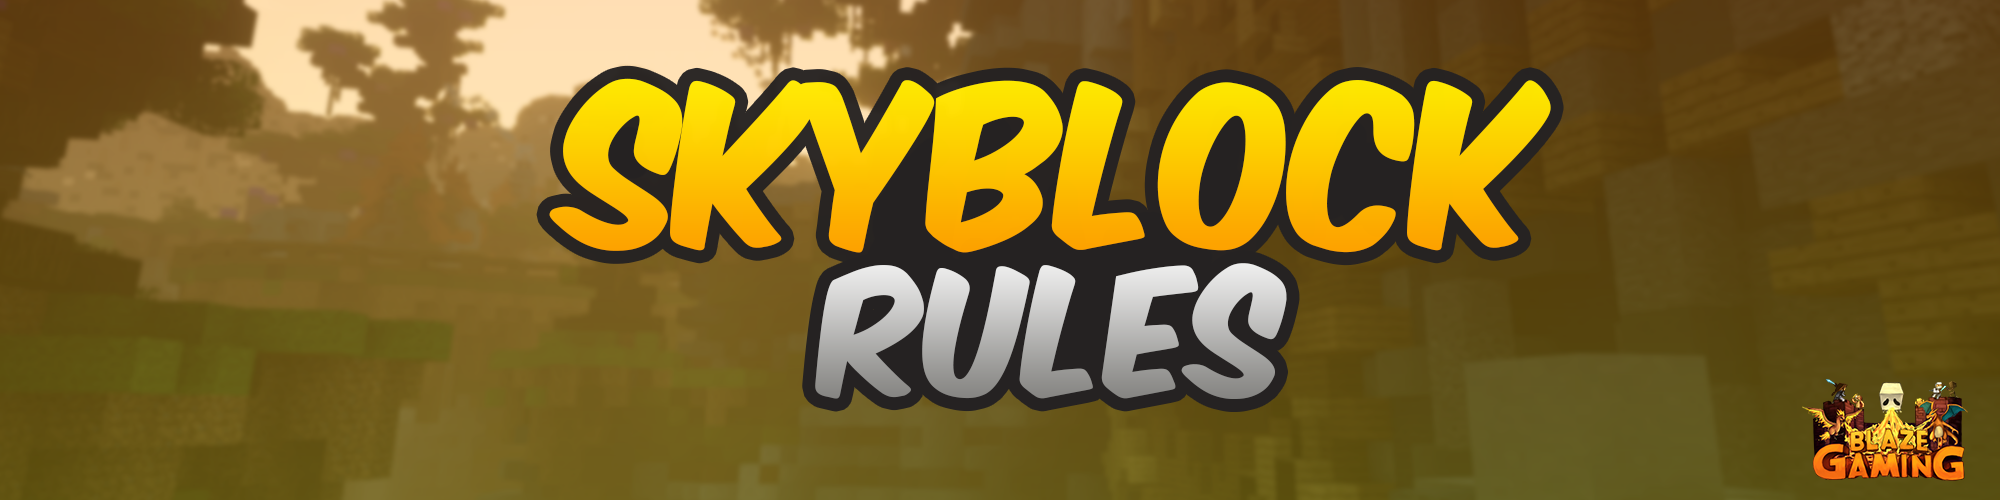 Skyblock Rules